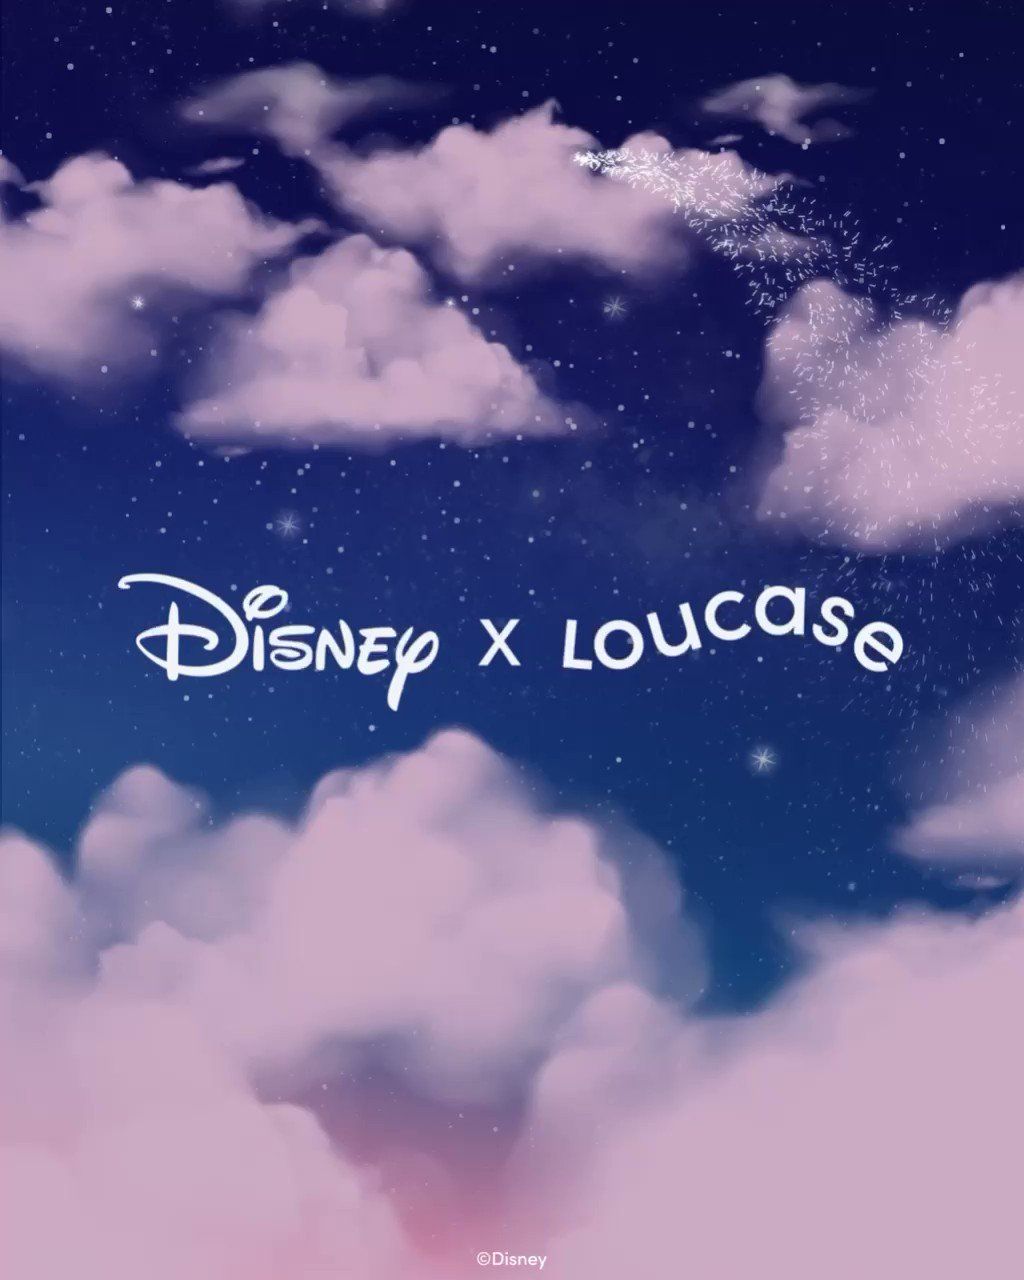 LOUCASE (loo Keis)'S OFFICIAL! We're Excited To Officially Announce That We're Collaborating With Disney! ✨ RT If You're Excited For The Disney X Loucase Collaboration